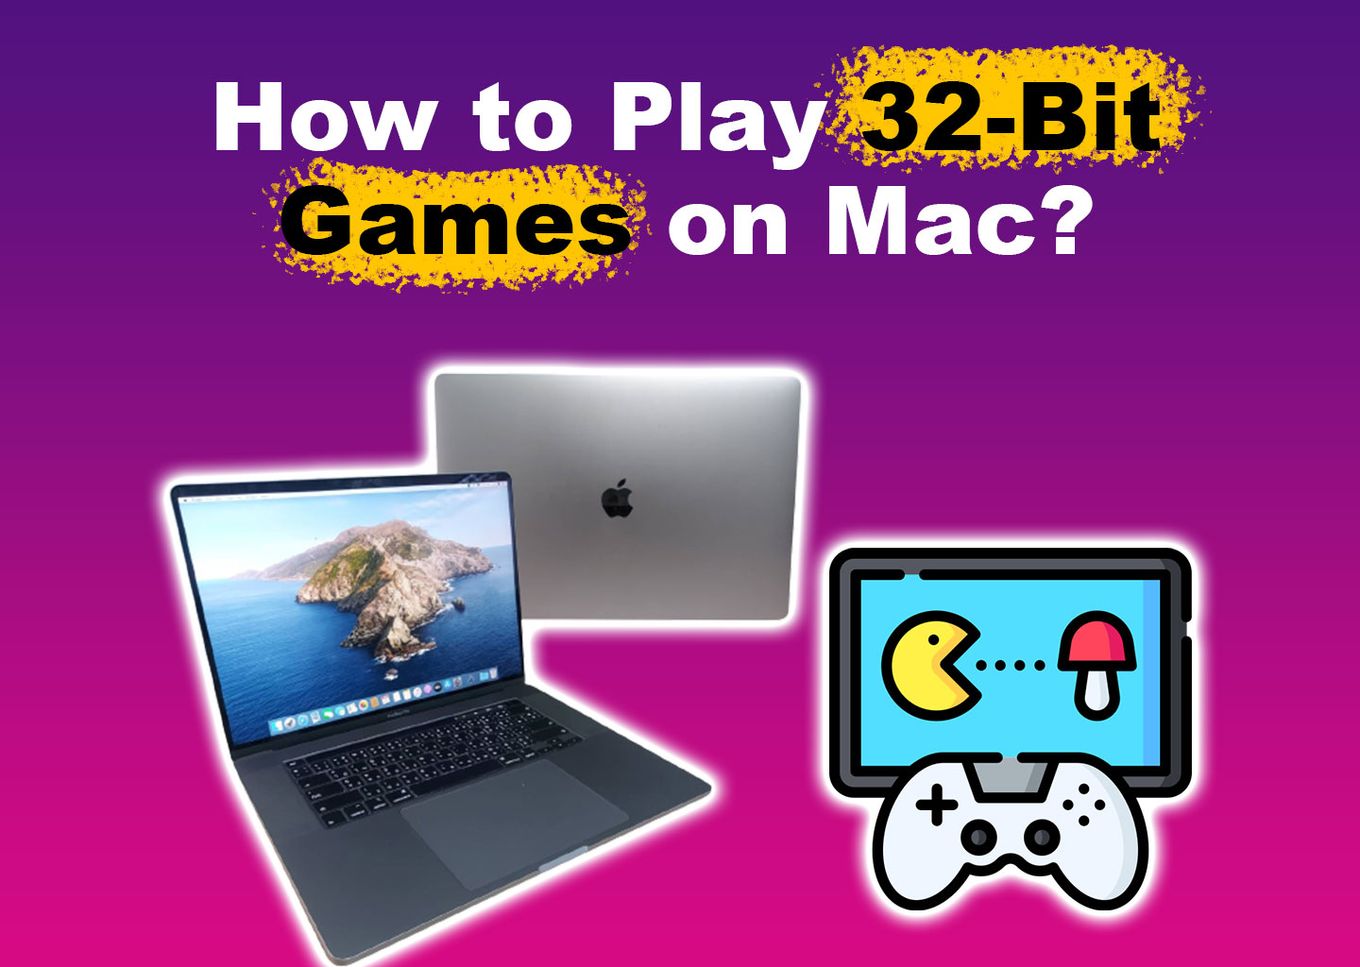 How to download and install Steam games on a Mac